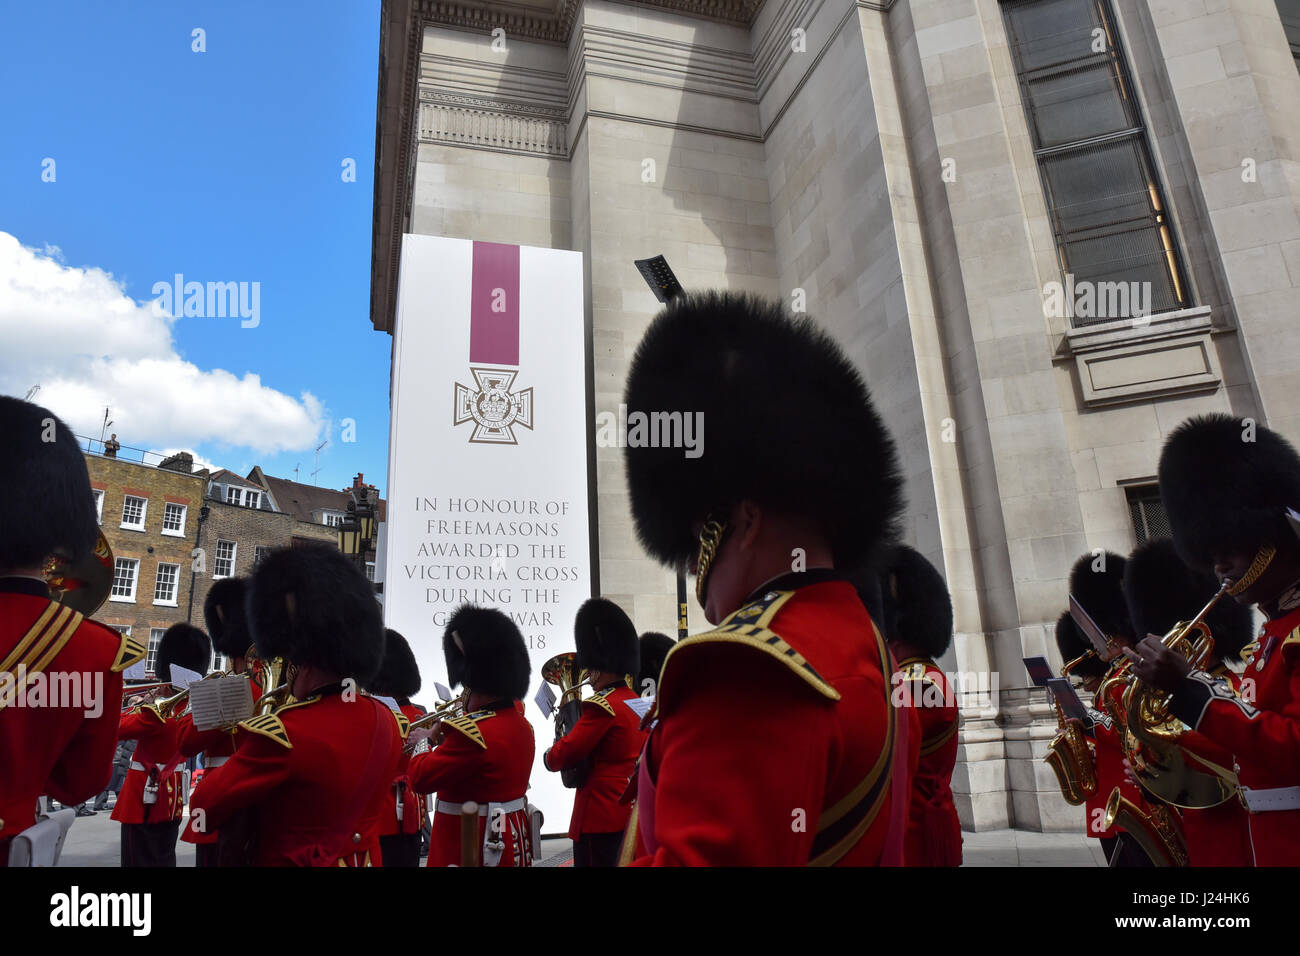 A commemoration is held outside the Freemasons' Hall for the 64 Freemason's who won the Victoria Cross. Credit: Matthew Chattle/Alamy Live News Stock Photo